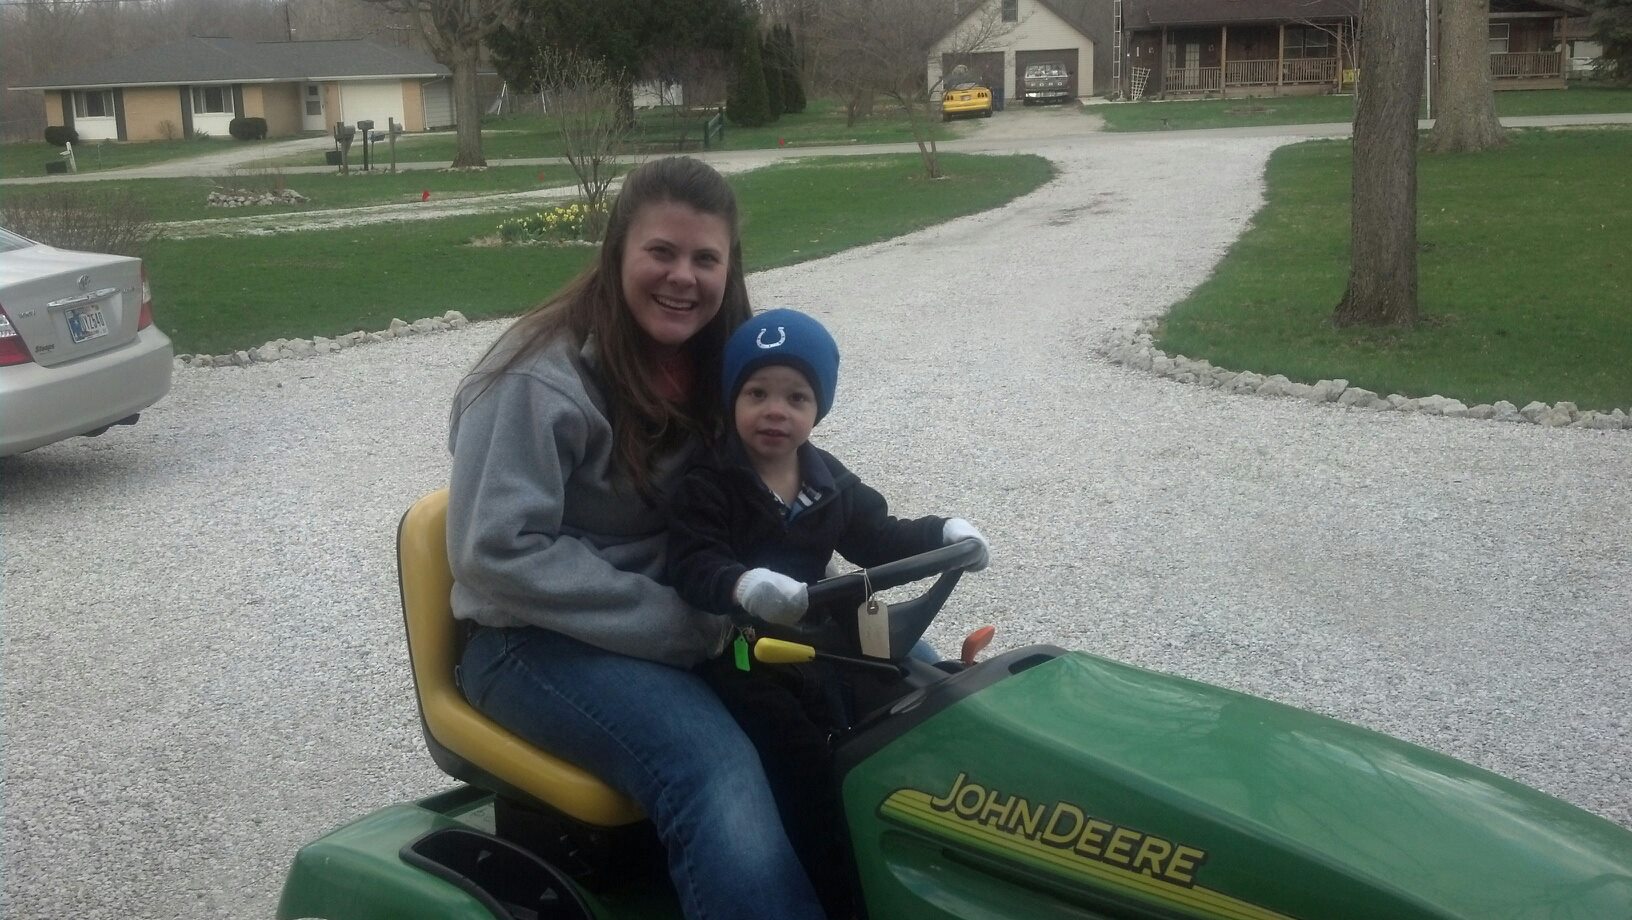 He loves this kind of mowing.